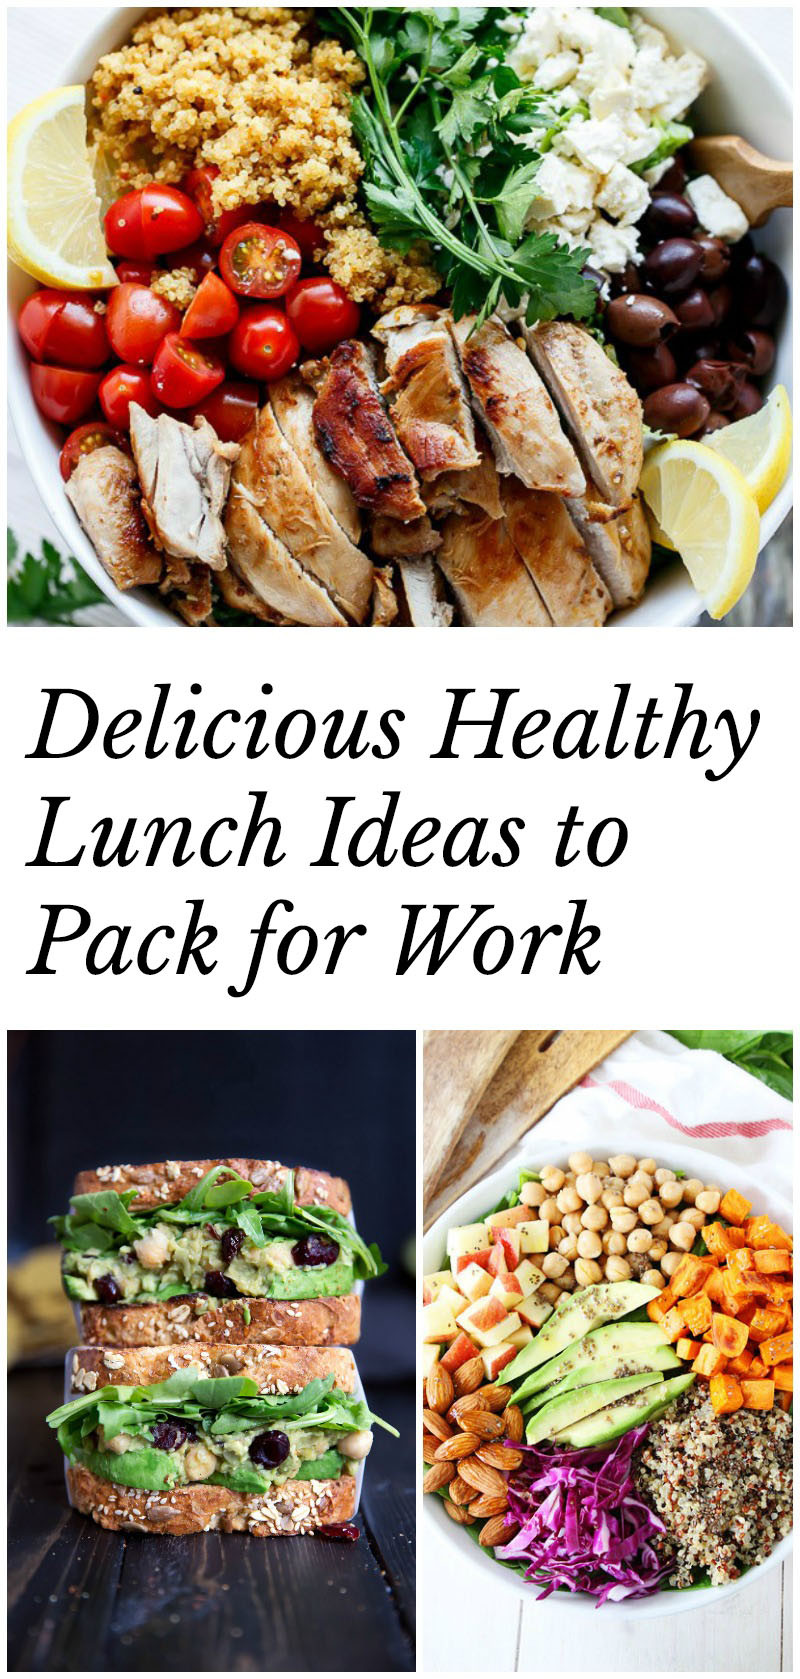 Healthy Lunches For Work
 Healthy Lunch Ideas to Pack for Work 40 recipes